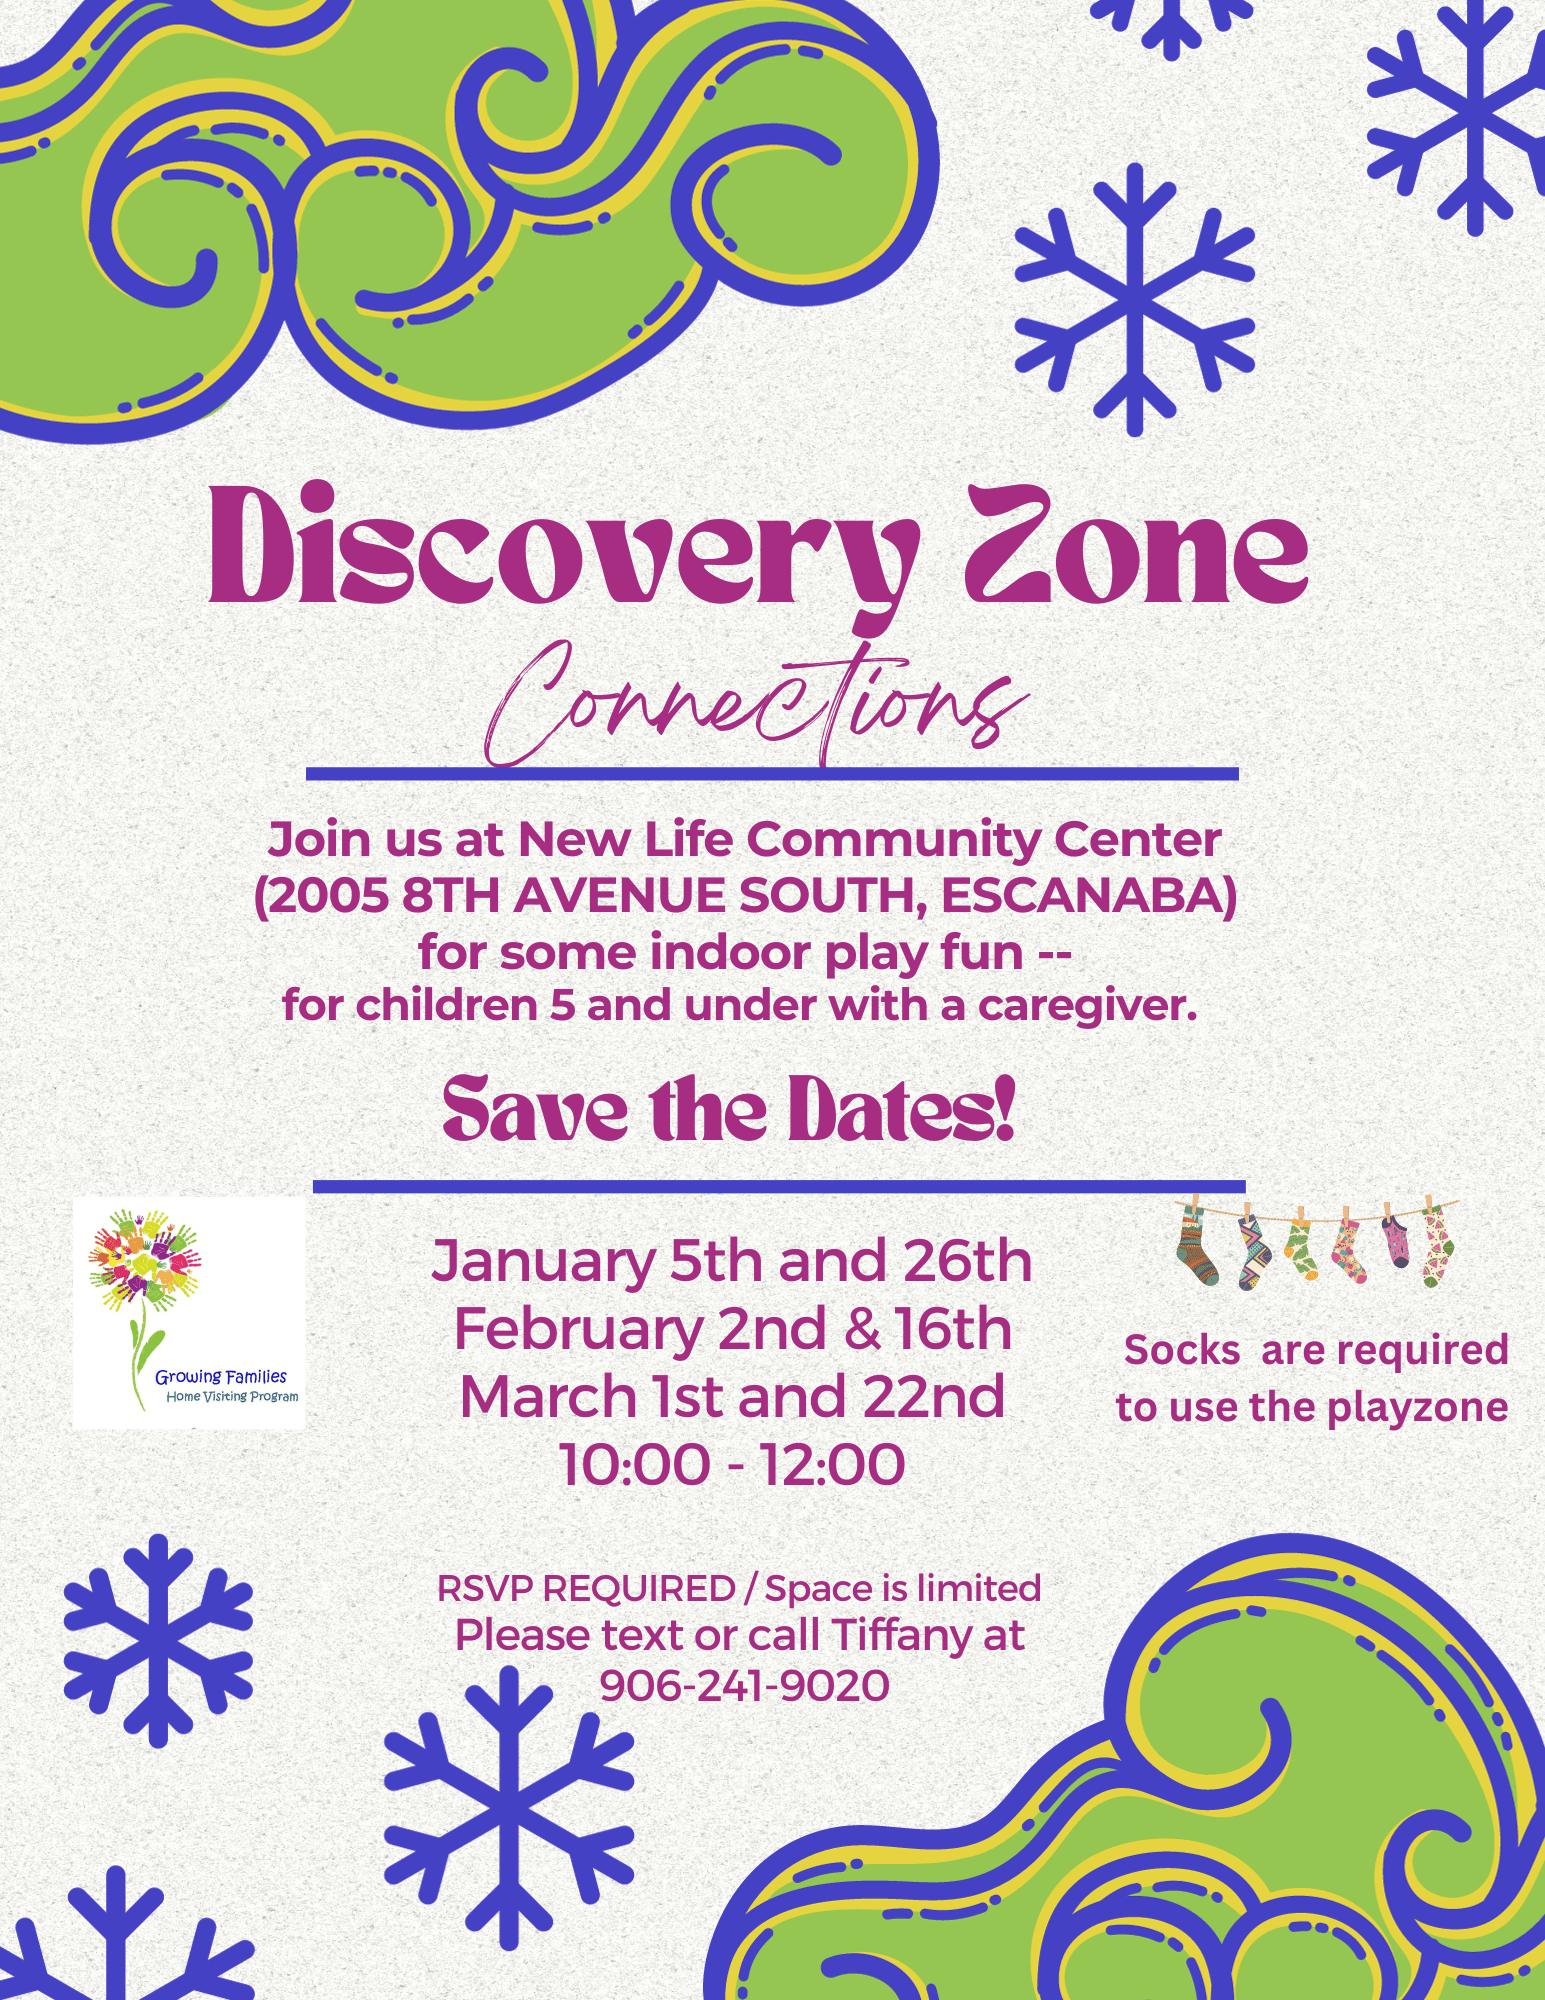 Discovery Zone Connections. Joine us at New Life Community Center (2005 8th Avenue South, Escanaba, ) for some indoor play fun-- for children 5 and under with a caregiver. Save the dates! Feb. 2nd & 16rh, March 1st and 22nd, 10:00-12:00 RSVP Required/Space is limited Please text or call Tiffany at 906-241-9020.